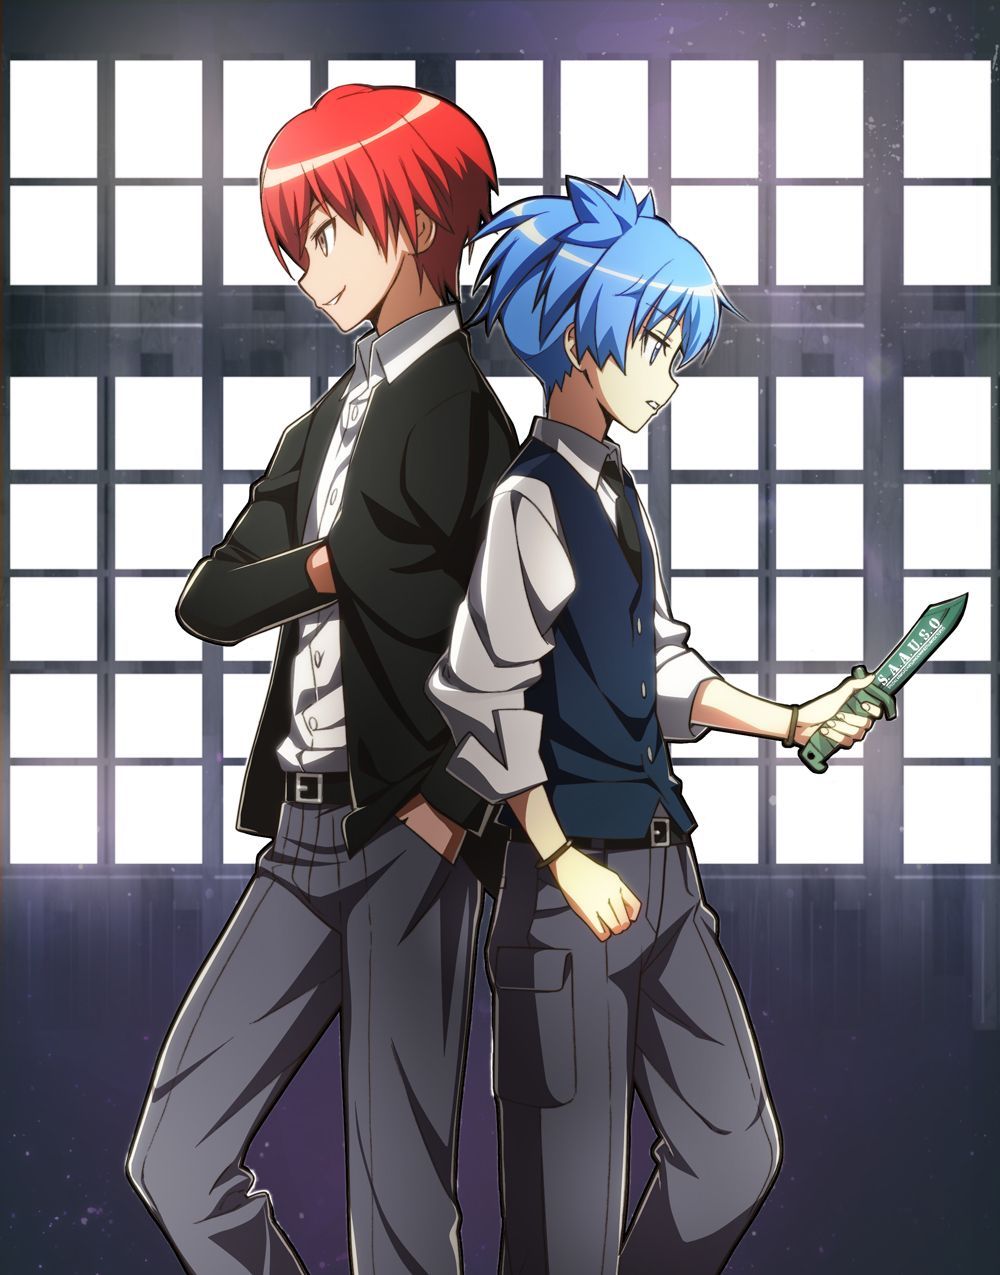 Assassination Classroom. Two of my fav characters. The ending was